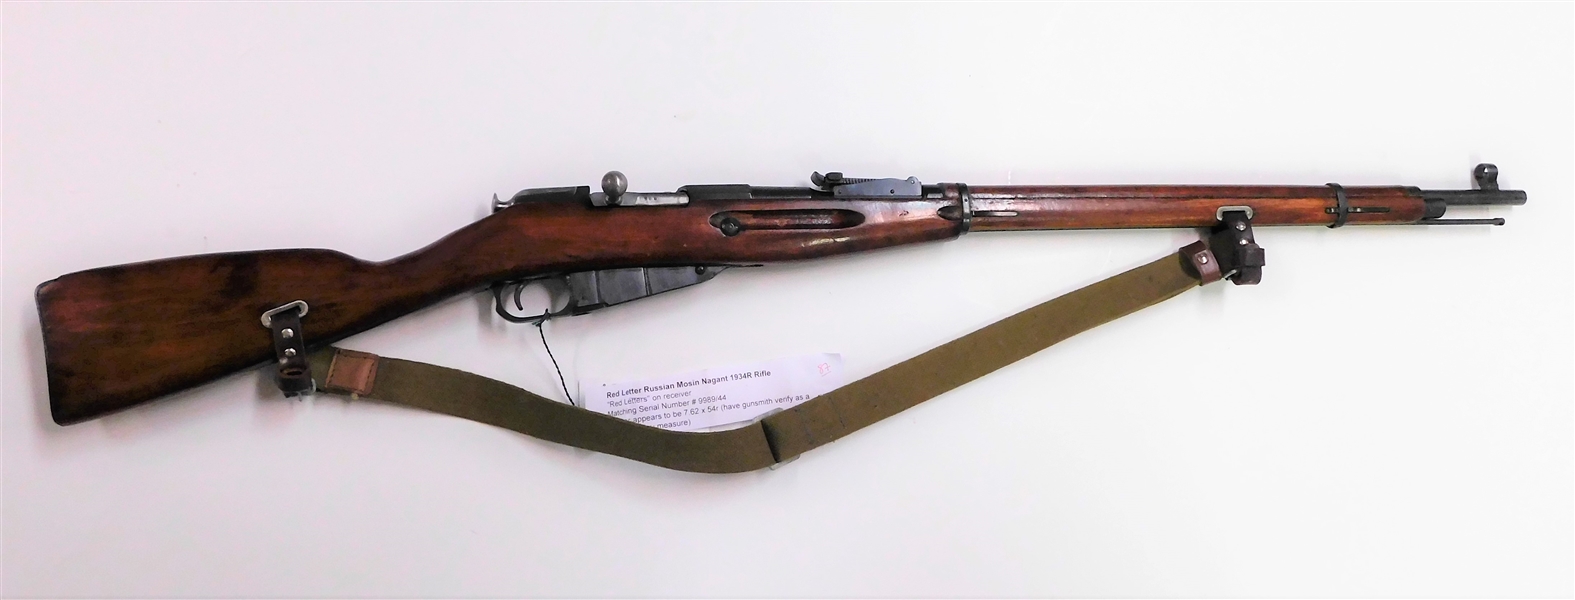 Red Letter Russian Mosin Nagant 1934R Rifle - "Red Letters" on Receiver - Matching Serial Numbers - 7.62 x 54r